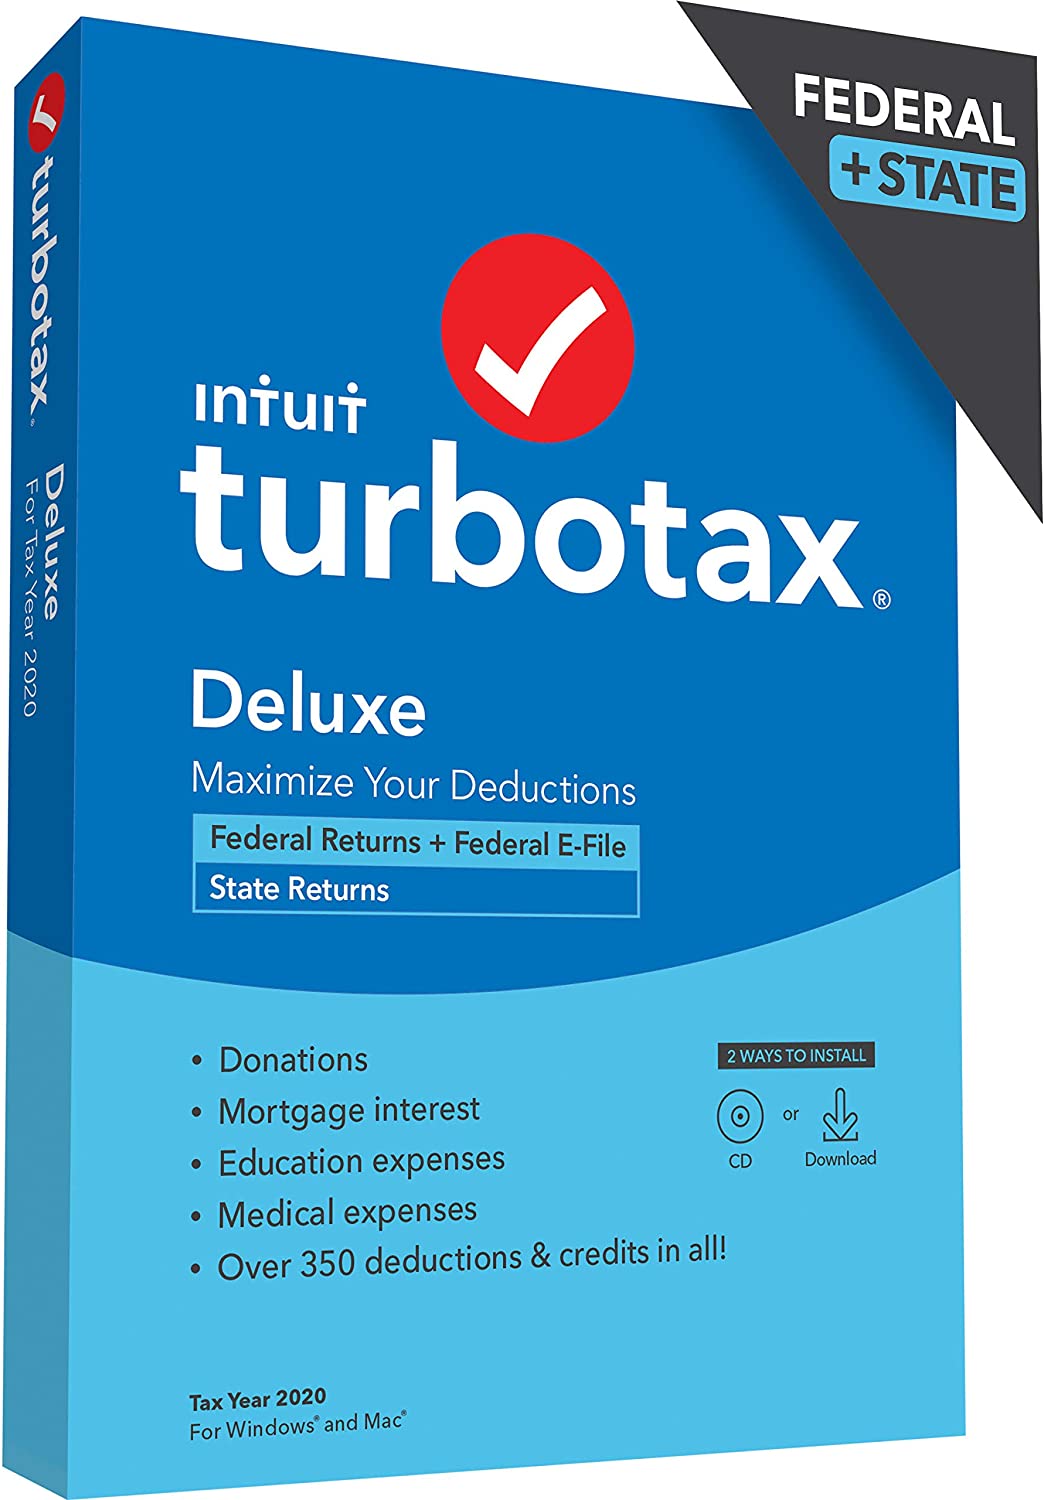 TurboTax Deluxe 2020 Desktop Tax Software, Federal and ...